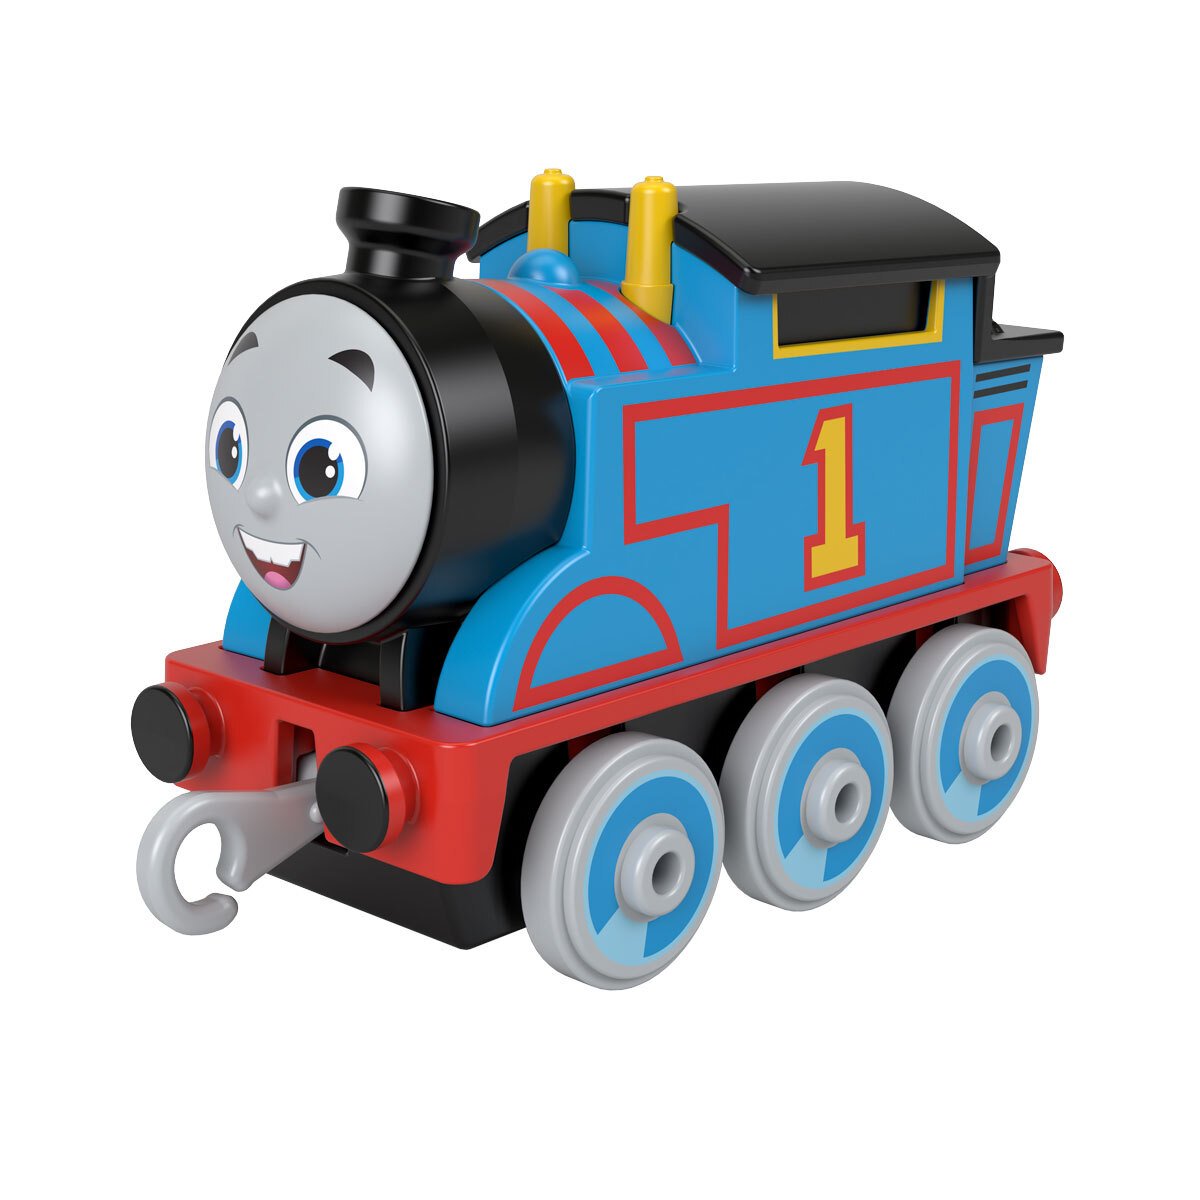 Buy one one Thomas & Friends diecast train for £7.50 and get another in the series for half price at The Entertainer